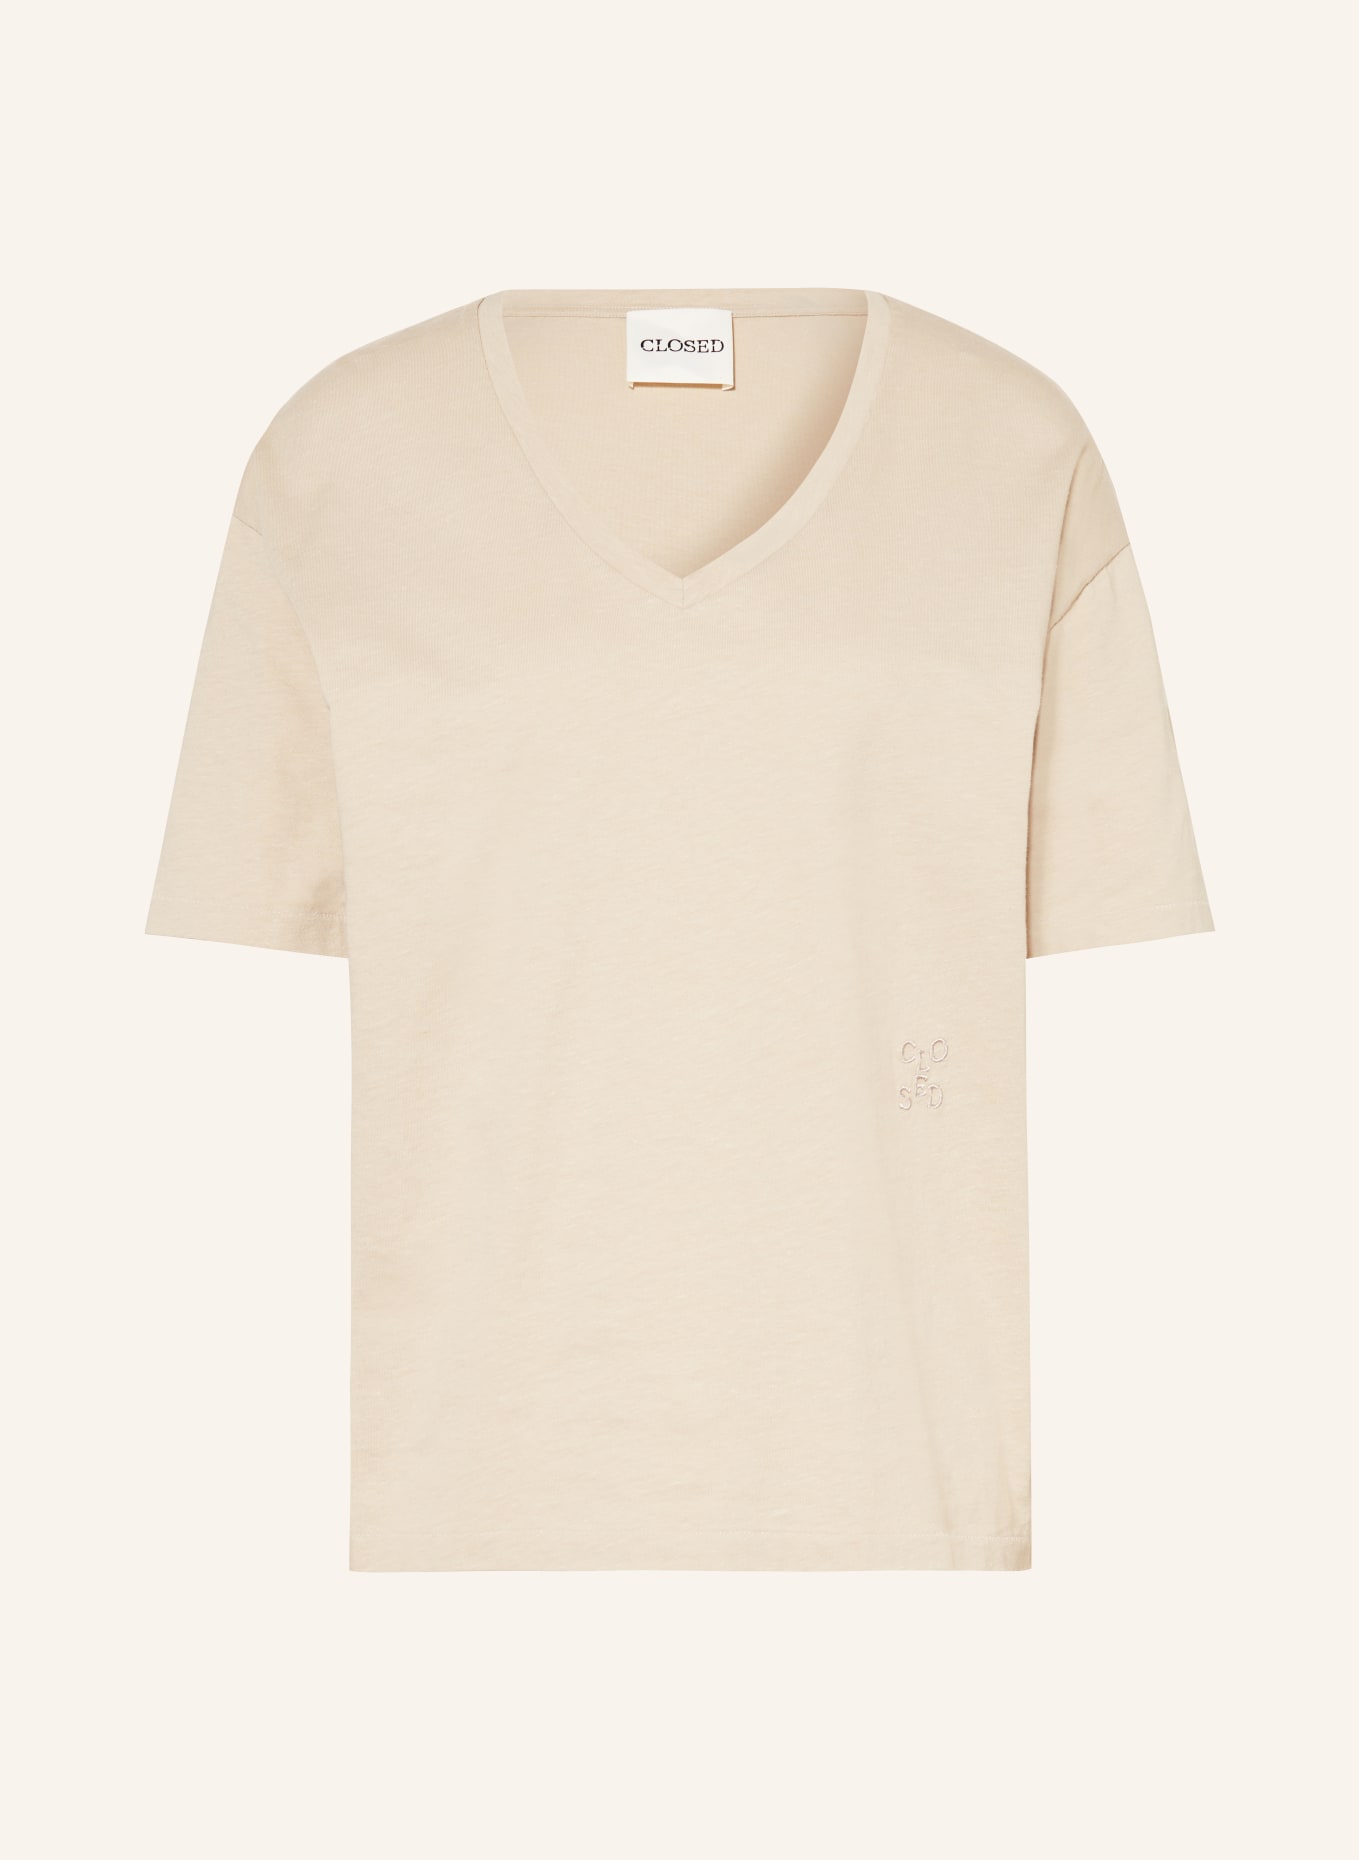 CLOSED T-shirt, Color: LIGHT BROWN (Image 1)